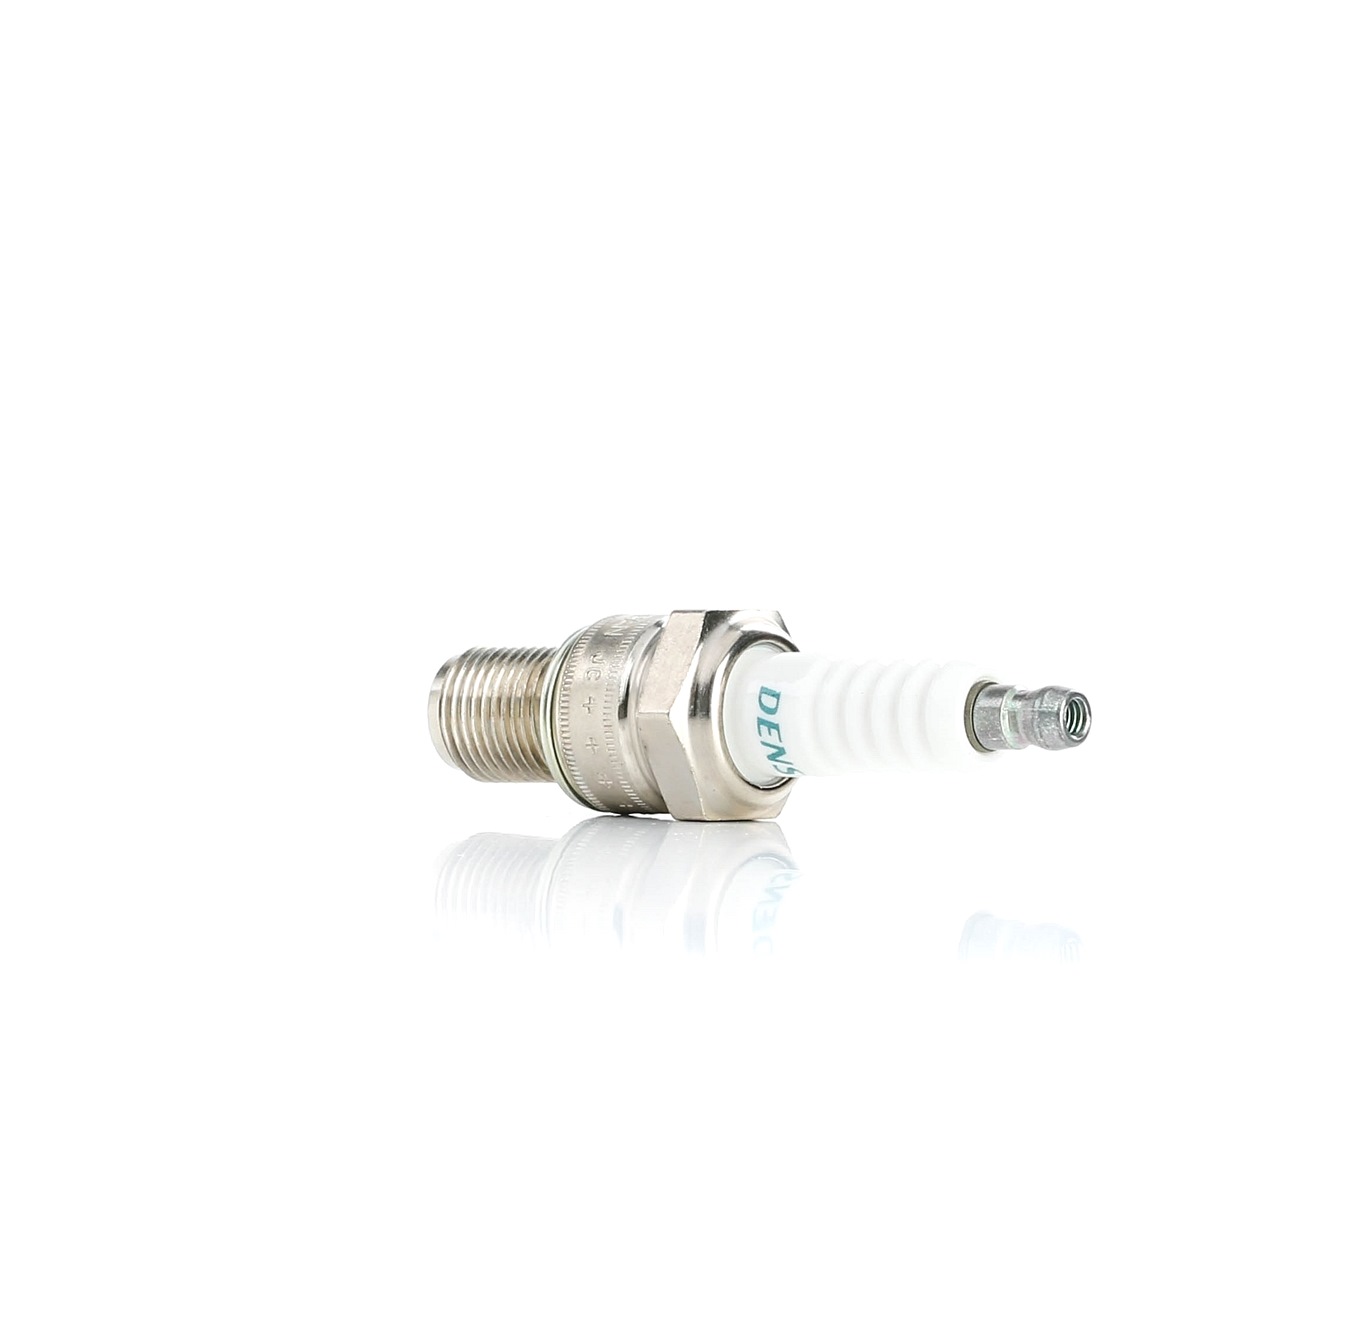 DENSO Iridium Power Candela accensione Apert. chiave: 20.6 IW27 BETA Ciclomotore Maxiscooter